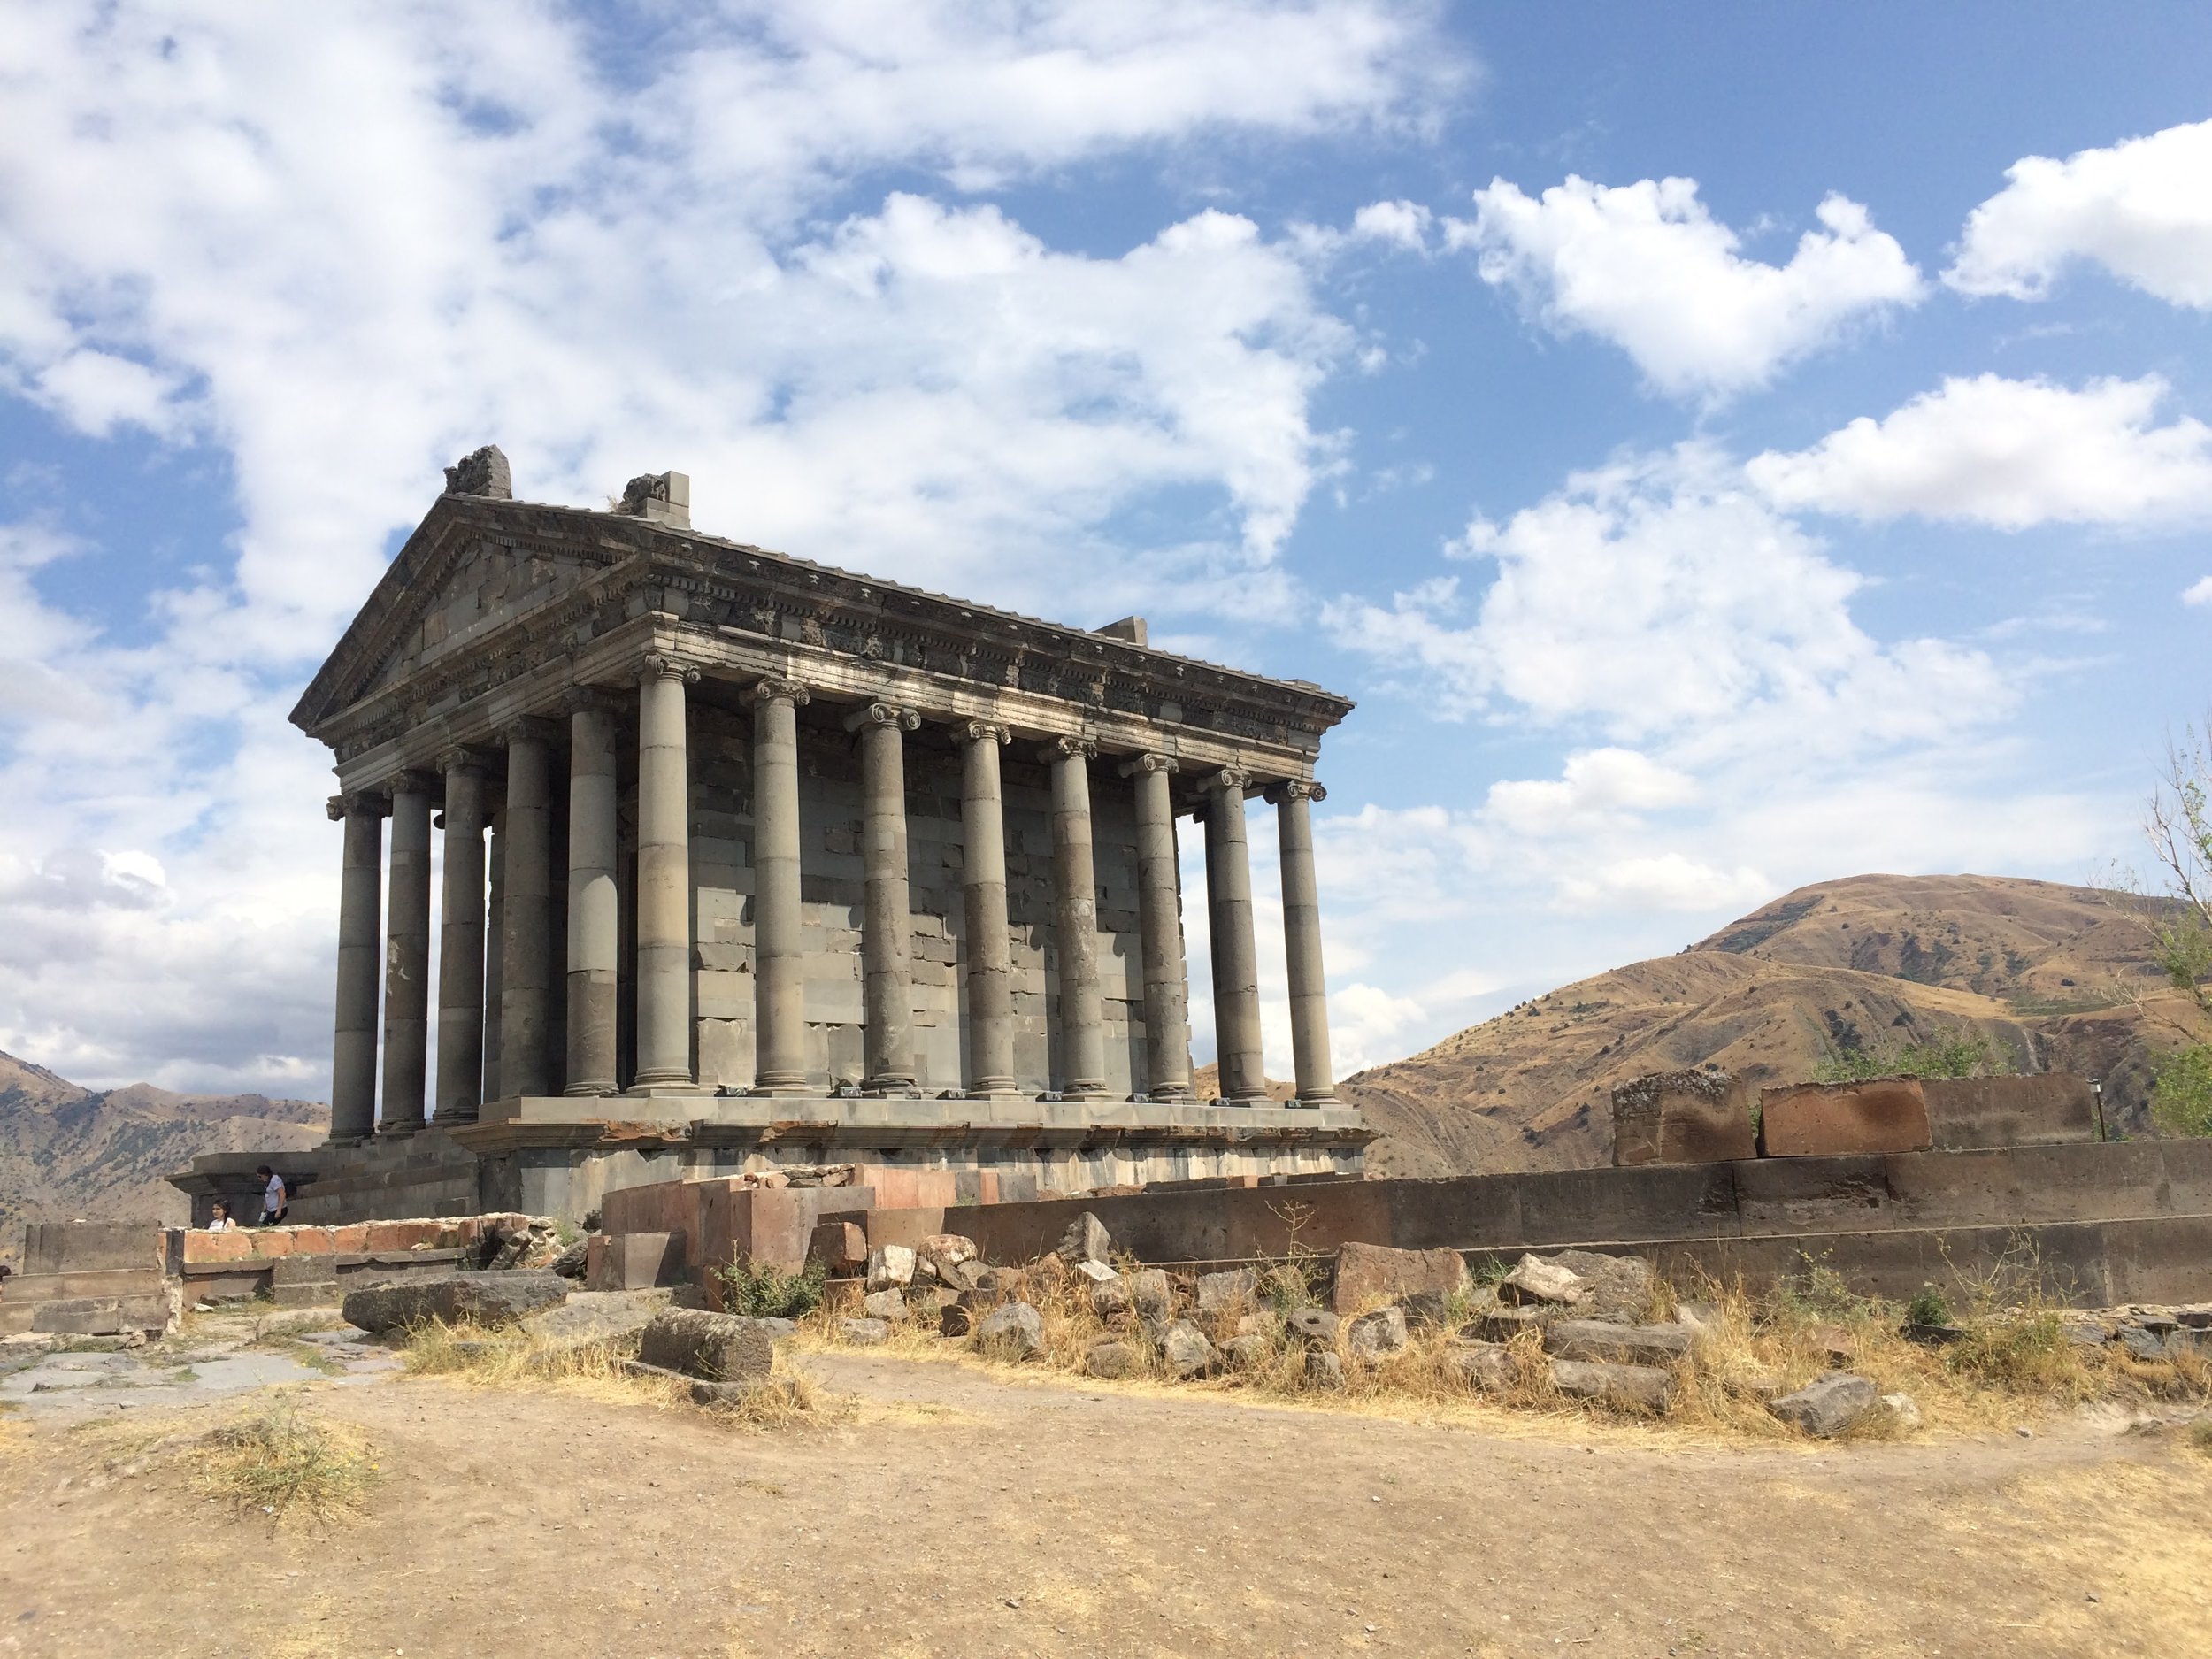 SMITHSONIAN: What’s an Ancient Roman Temple Doing in Armenia?